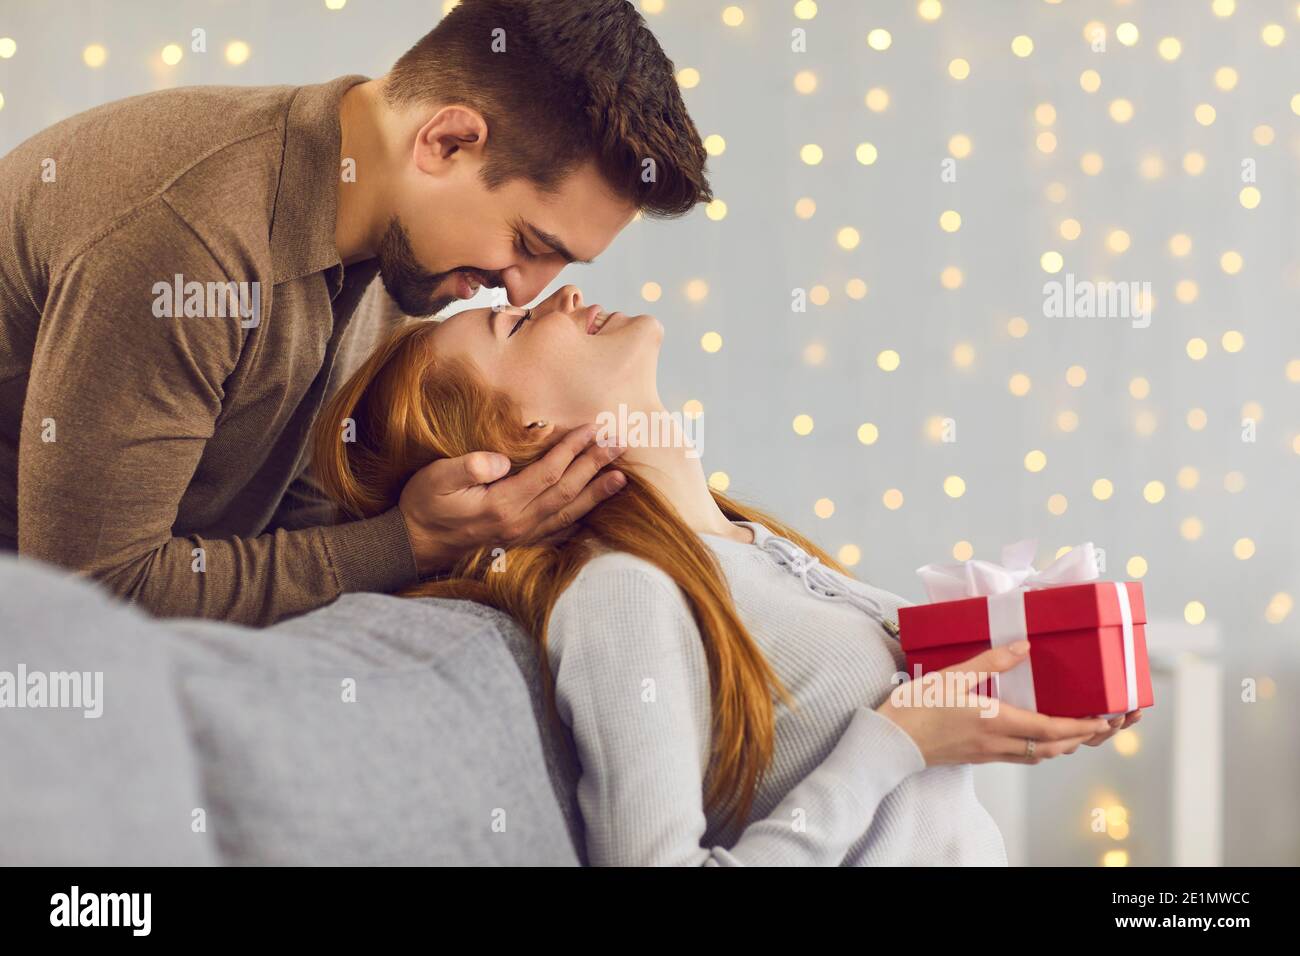 Loving man standing behind and kissing his girlfriend on the forehead, who is sitting on the couch. Stock Photo